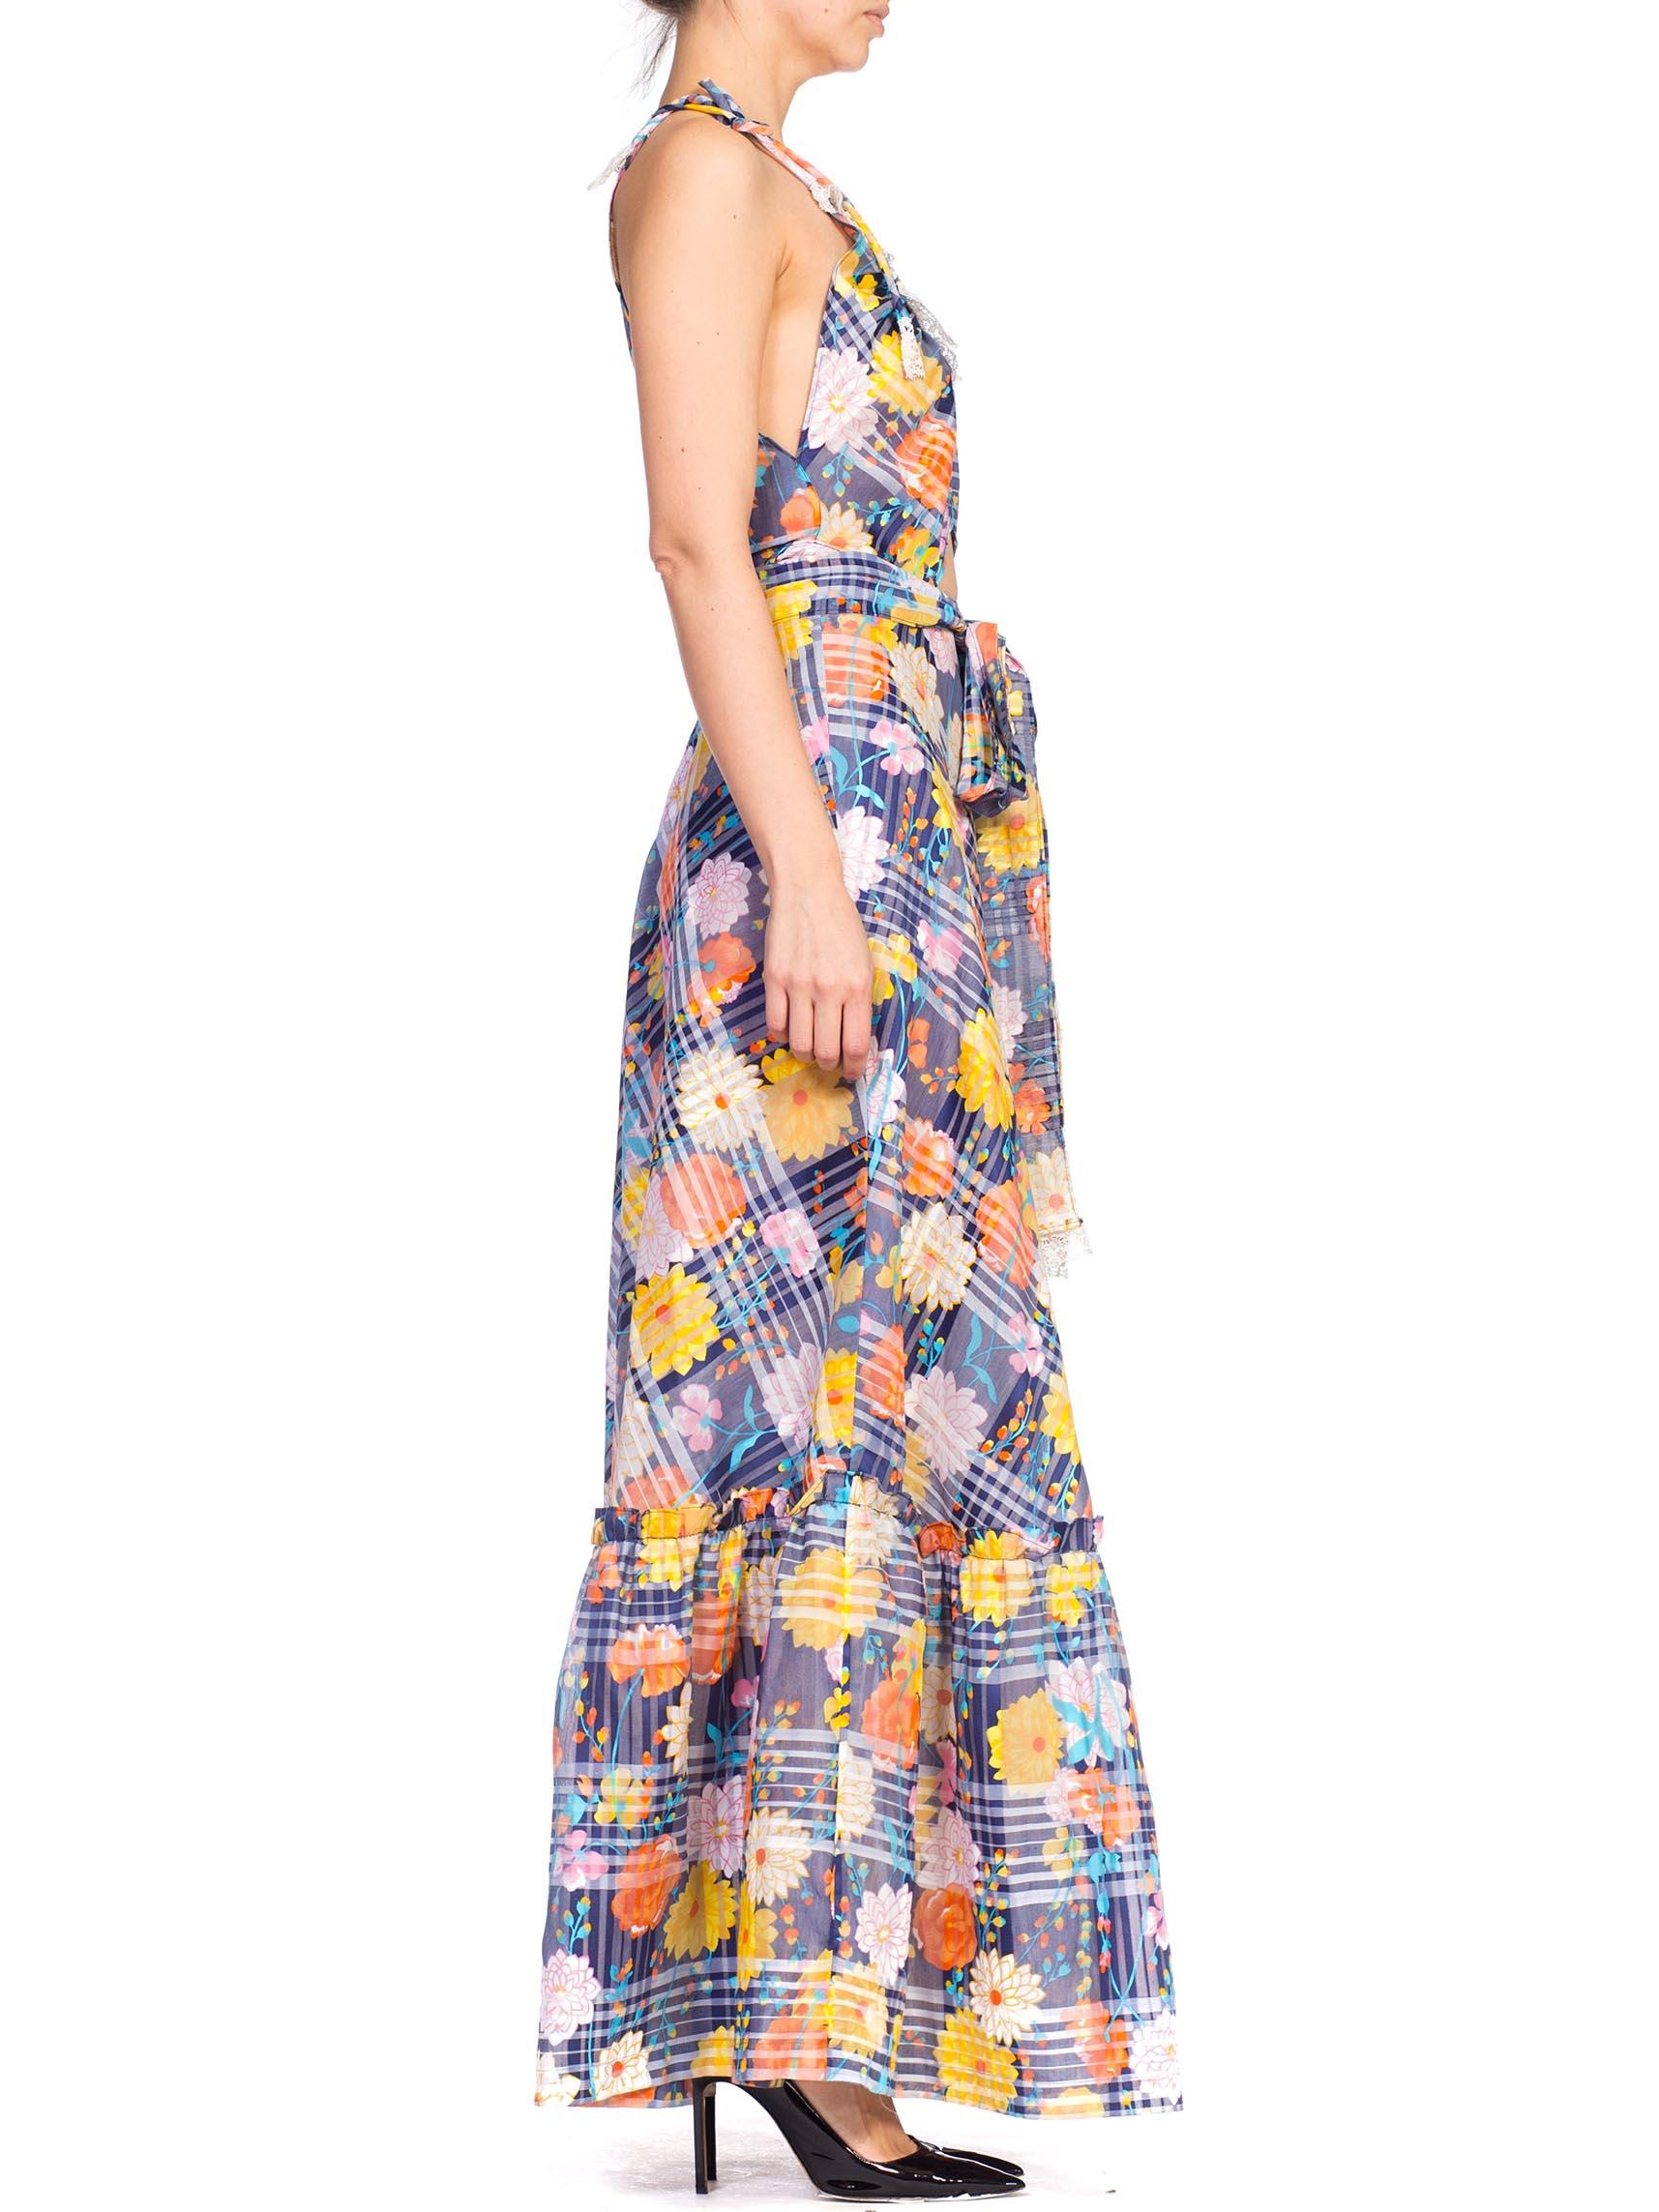 MORPHEW COLLECTION Summer Maxi Dress Made From 1970S Floral Printed Lt Weight Jacquard & Lace
MORPHEW COLLECTION is made entirely by hand in our NYC Ateliér of rare antique materials sourced from around the globe. Our sustainable vintage materials